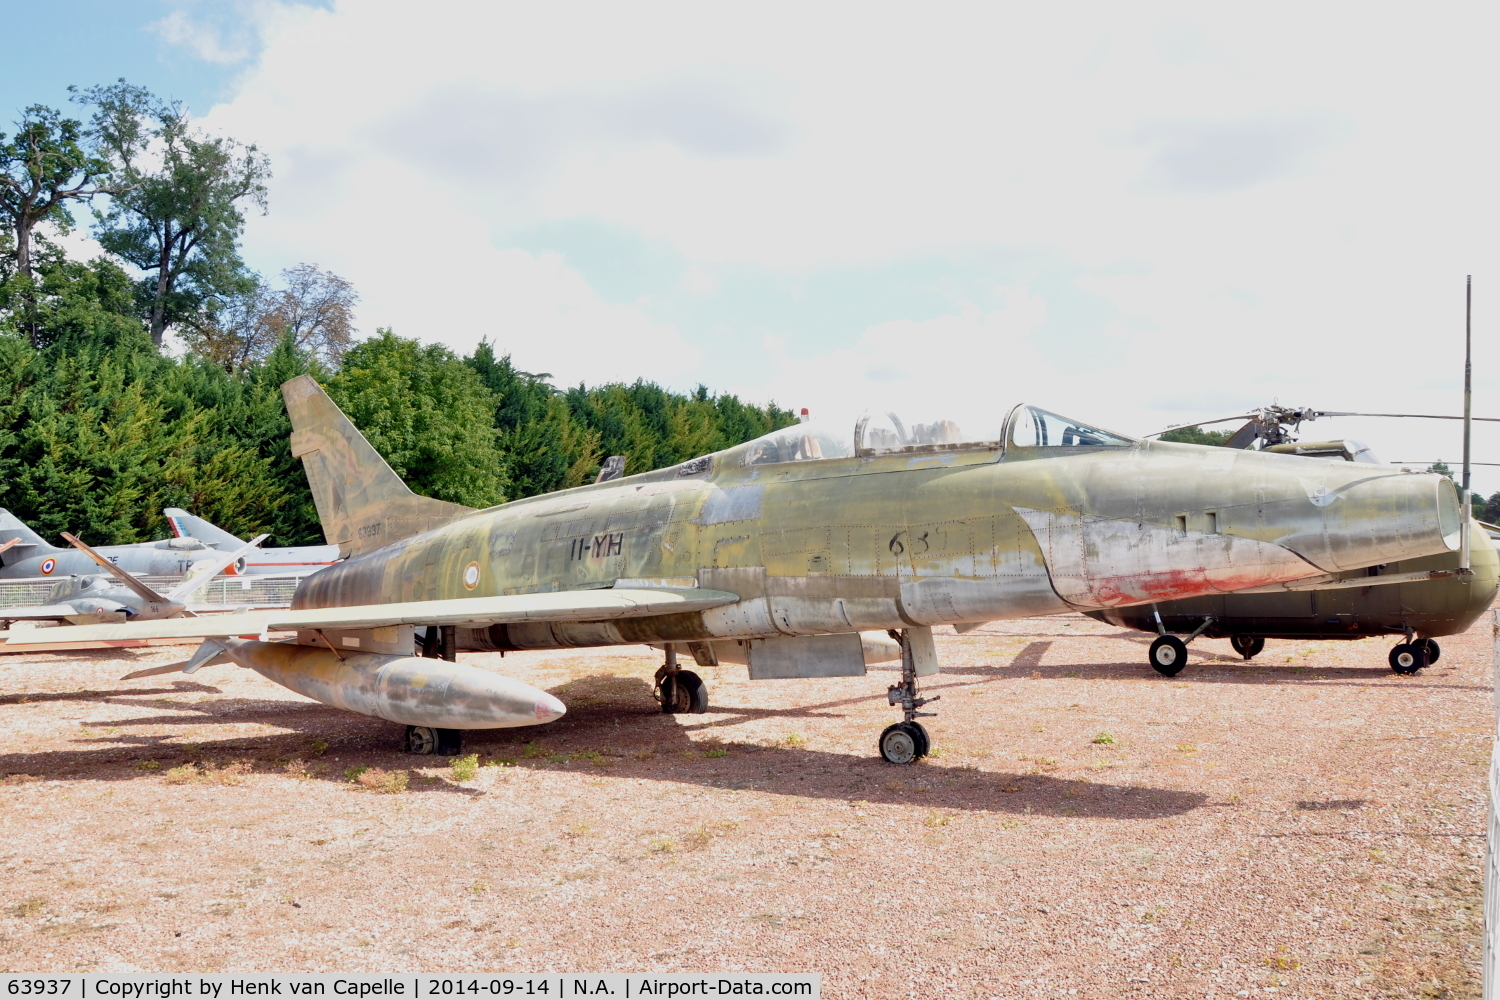 63937, 1956 North American F-100F Super Sabre C/N 243-213, North American F-100F Super Sabre two-seat fighter of the Armee de l' Air at the Chateau de Savigny aircraft museum.